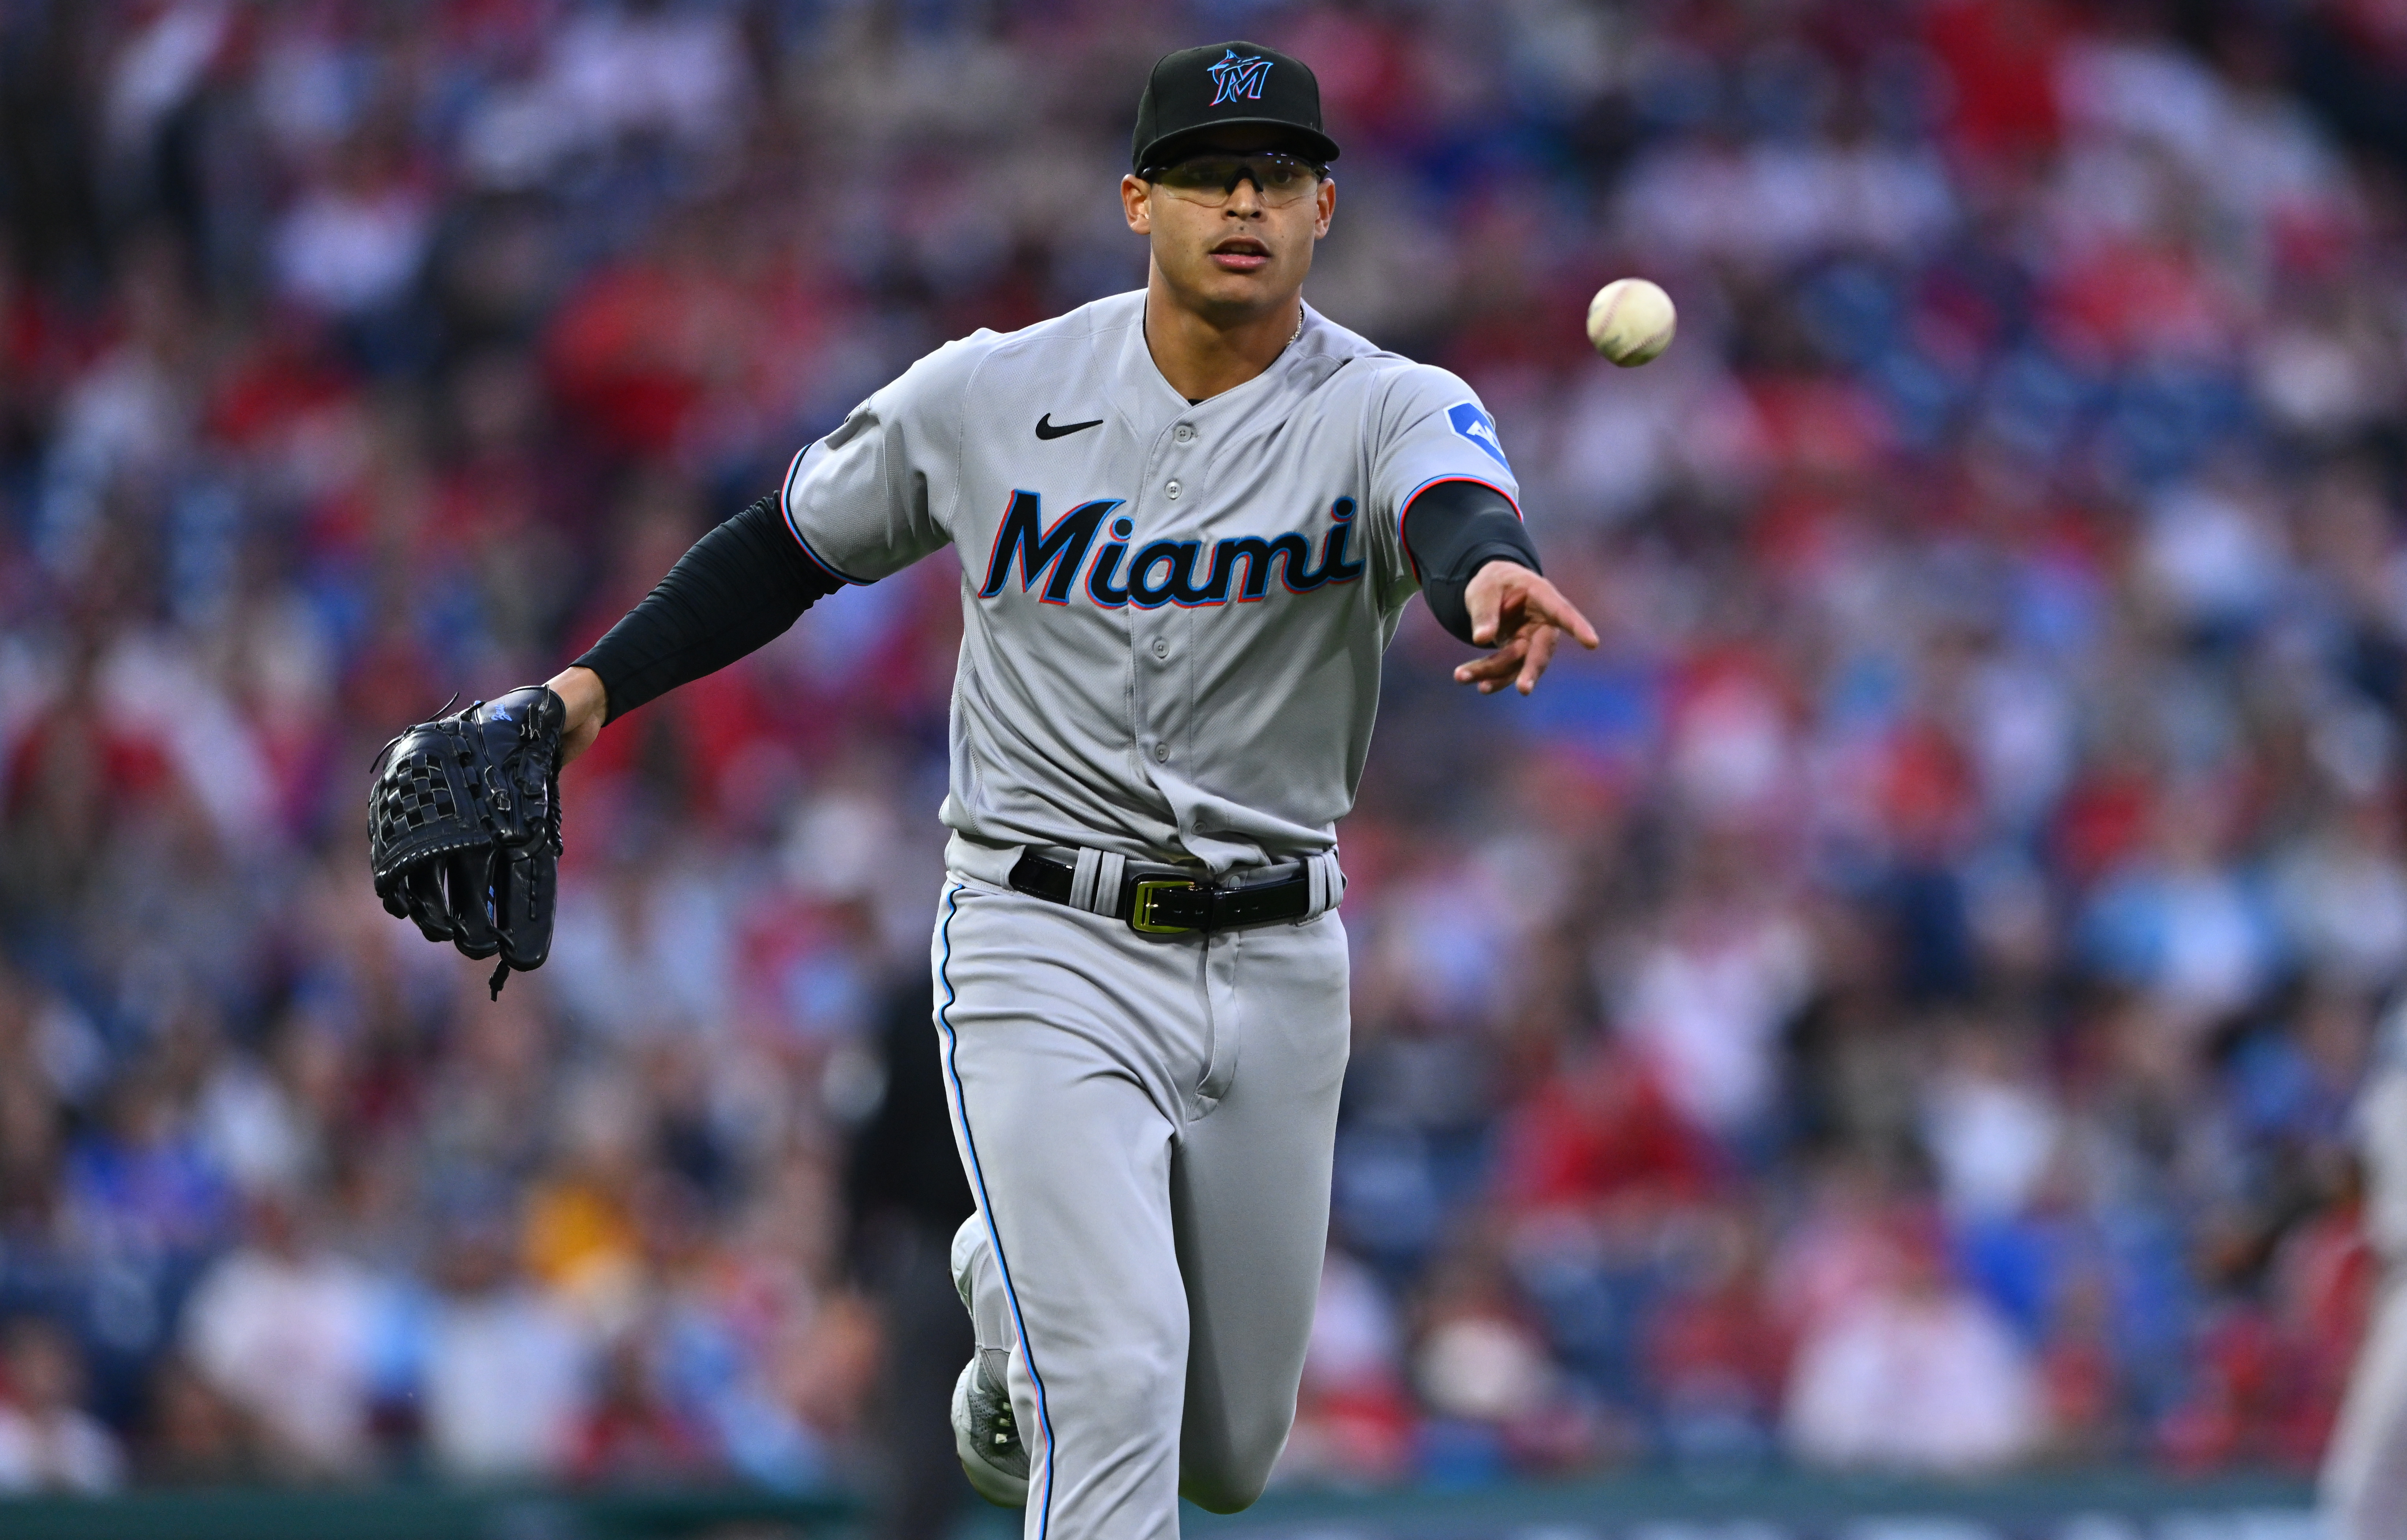 Luis Arraez hits for cycle in Marlins' 8-4 win over Phillies - WSVN 7News, Miami News, Weather, Sports